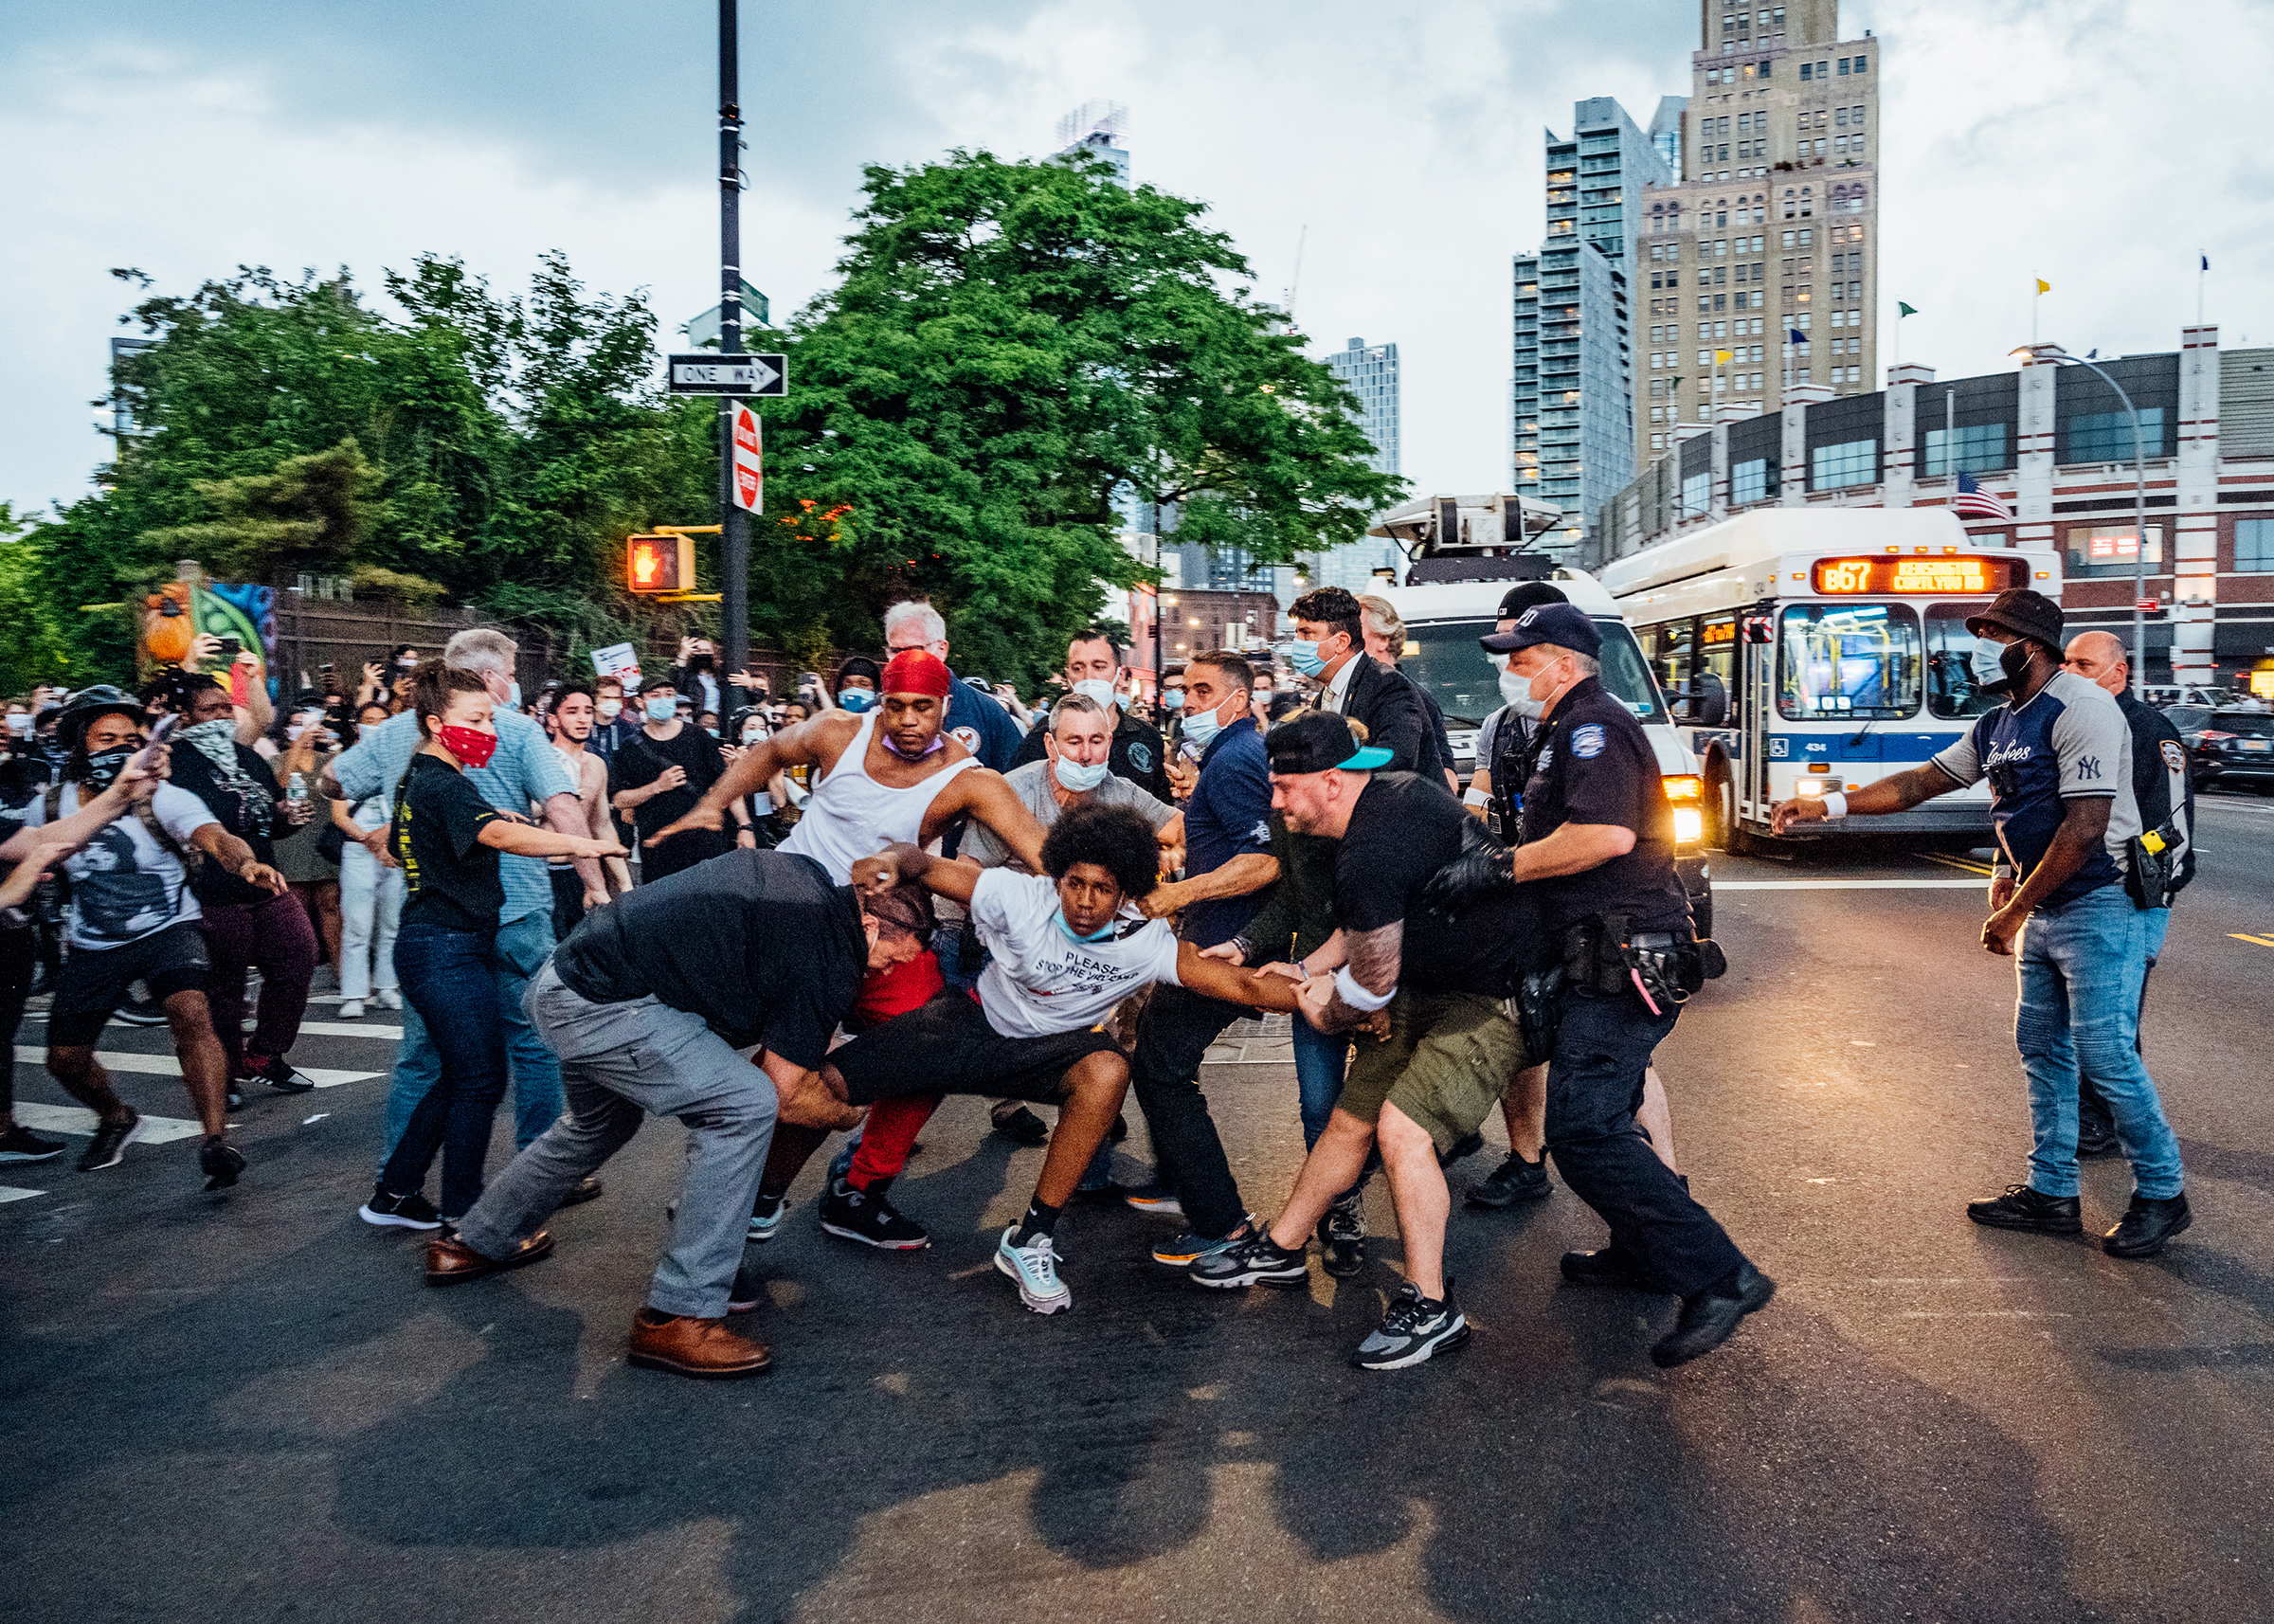 A protester, wearing a shirt that reads "Please Stop the Violence," is dragged near Brooklyn's Barclays Center on May 29, four days after George Floyd's killing. (Malike Sidibe for TIME)